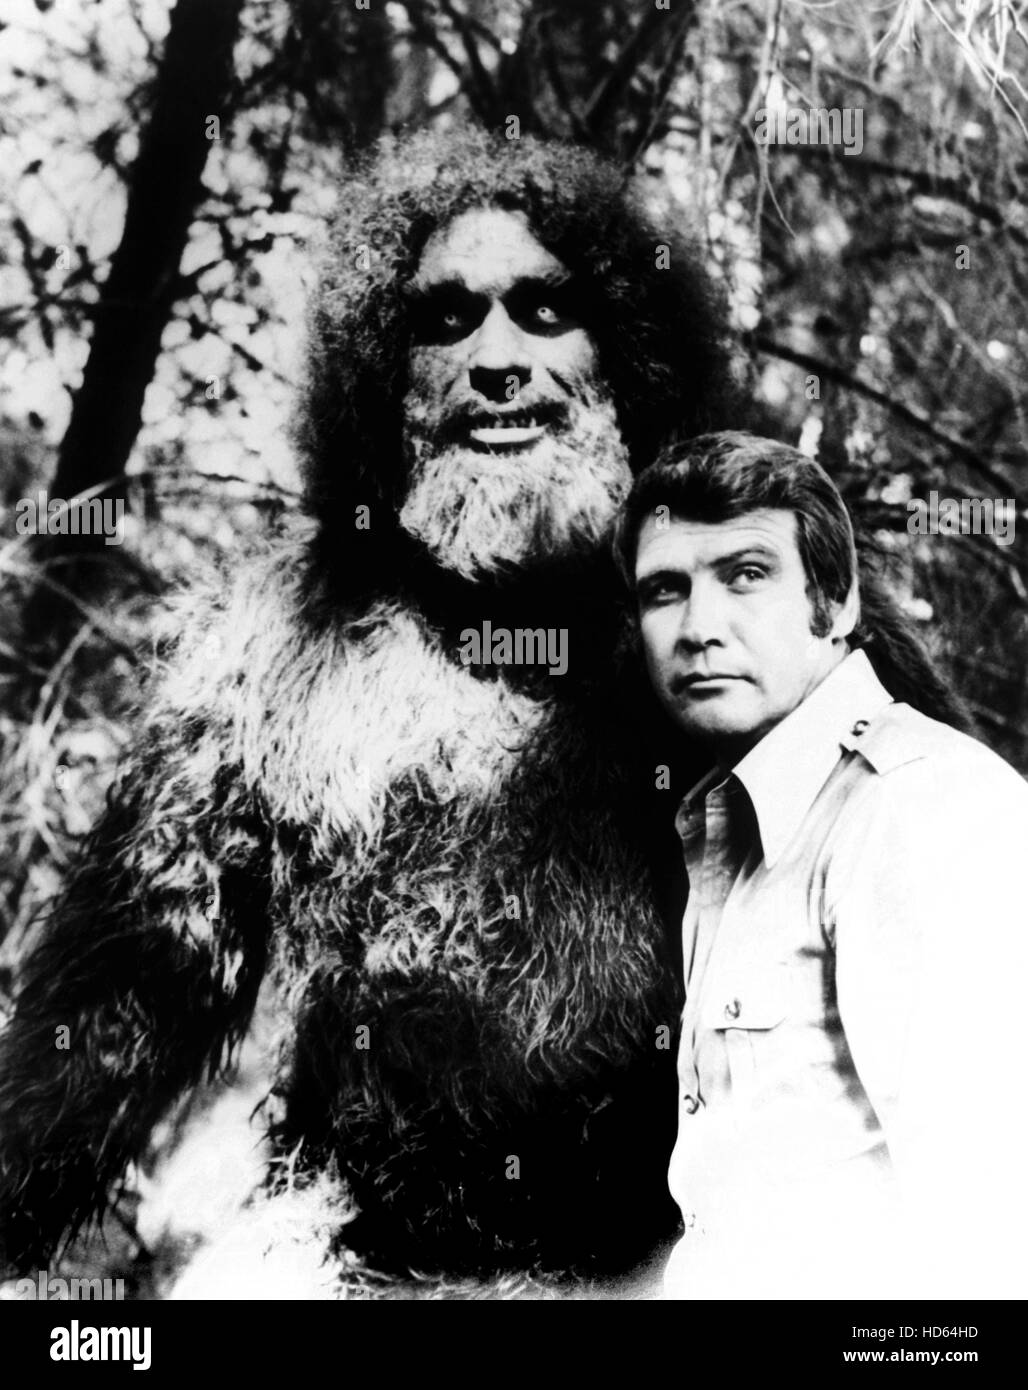 THE SIX MILLION DOLLAR MAN, from left: Andre the Giant, Lee Majors in 'The Secret of Bigfoot: Parts 1 and 2' (Season 3, Stock Photo